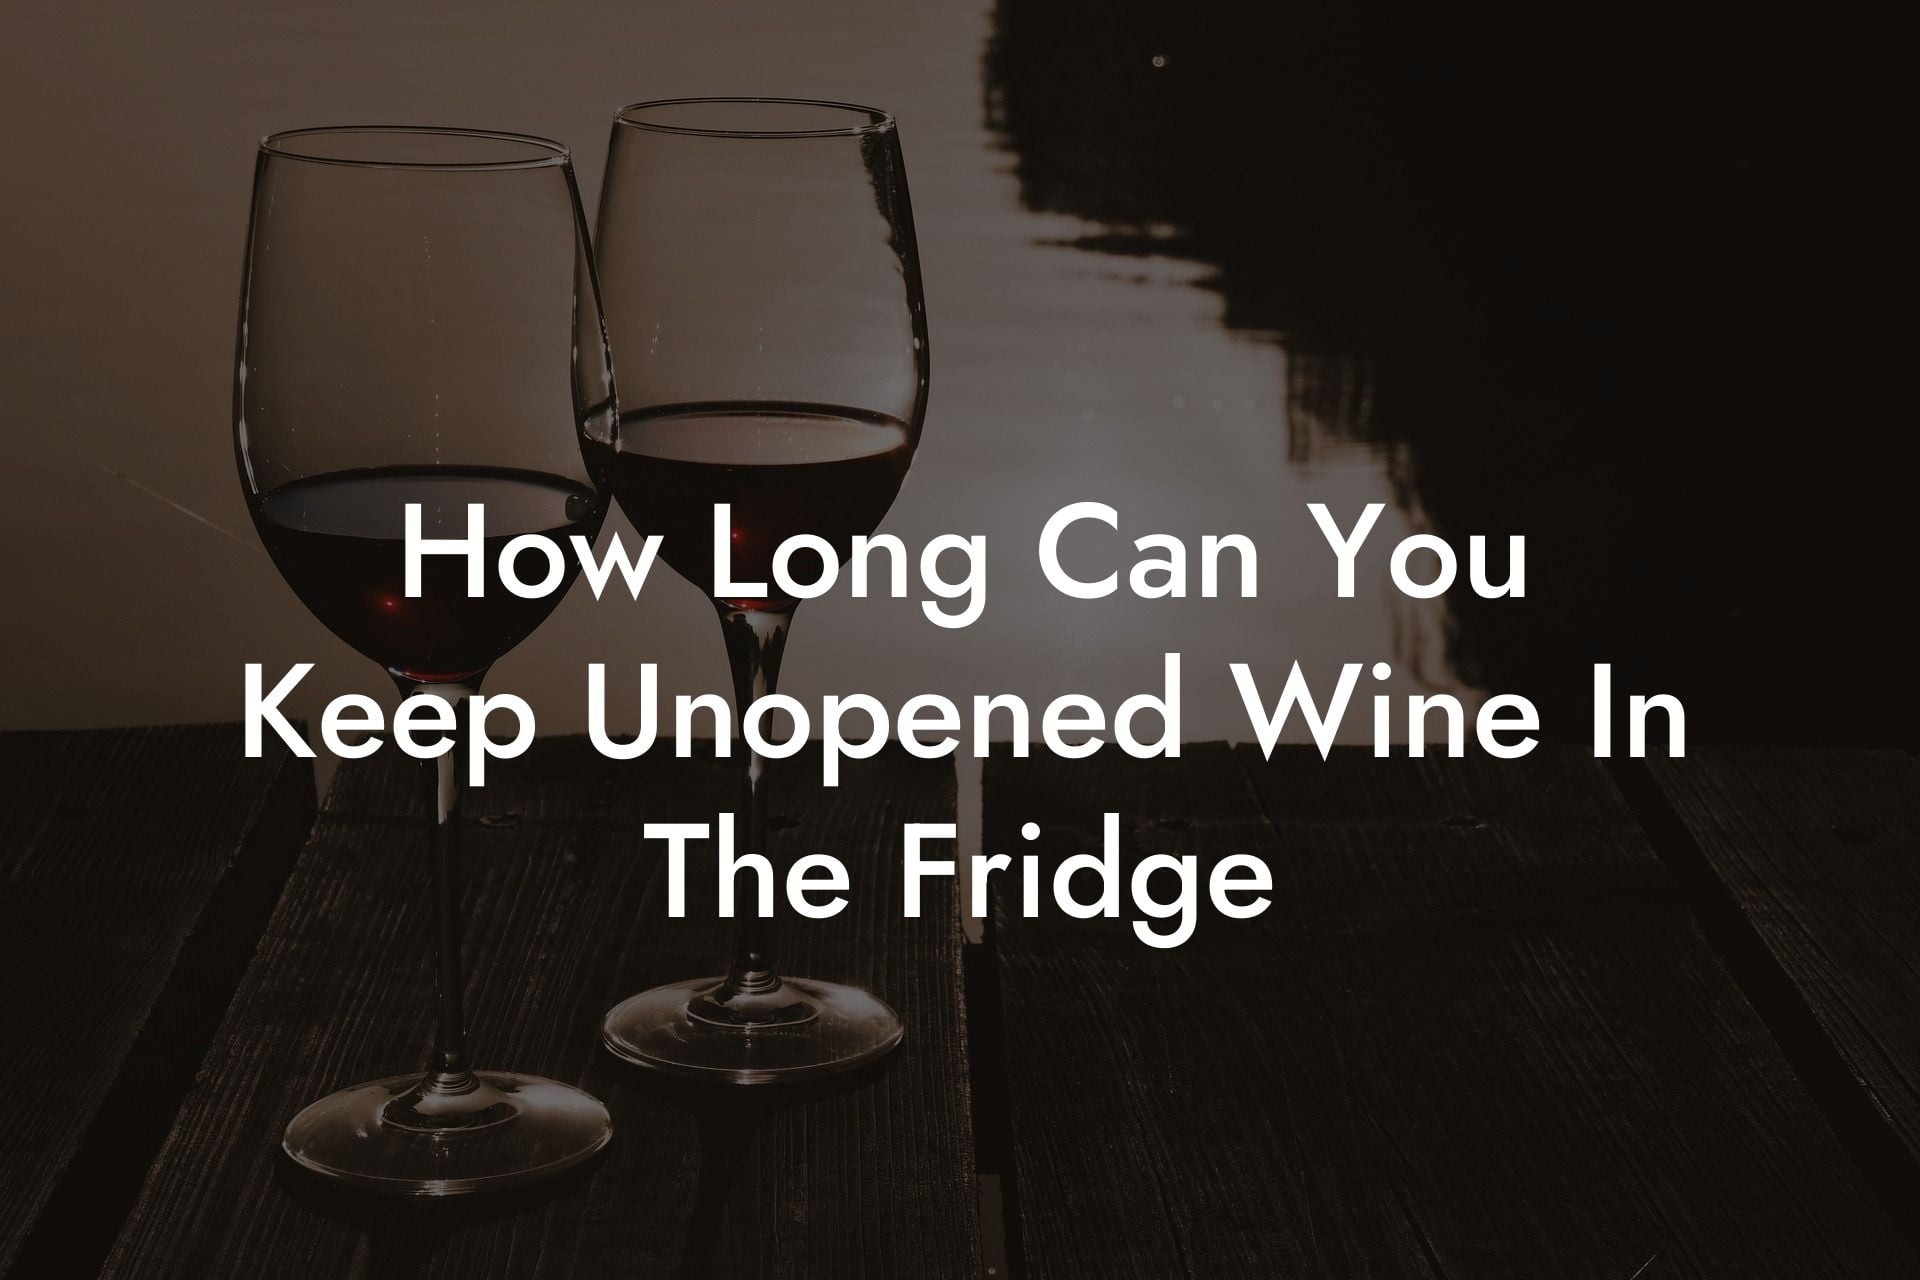 How Long Can You Keep Unopened Wine In The Fridge